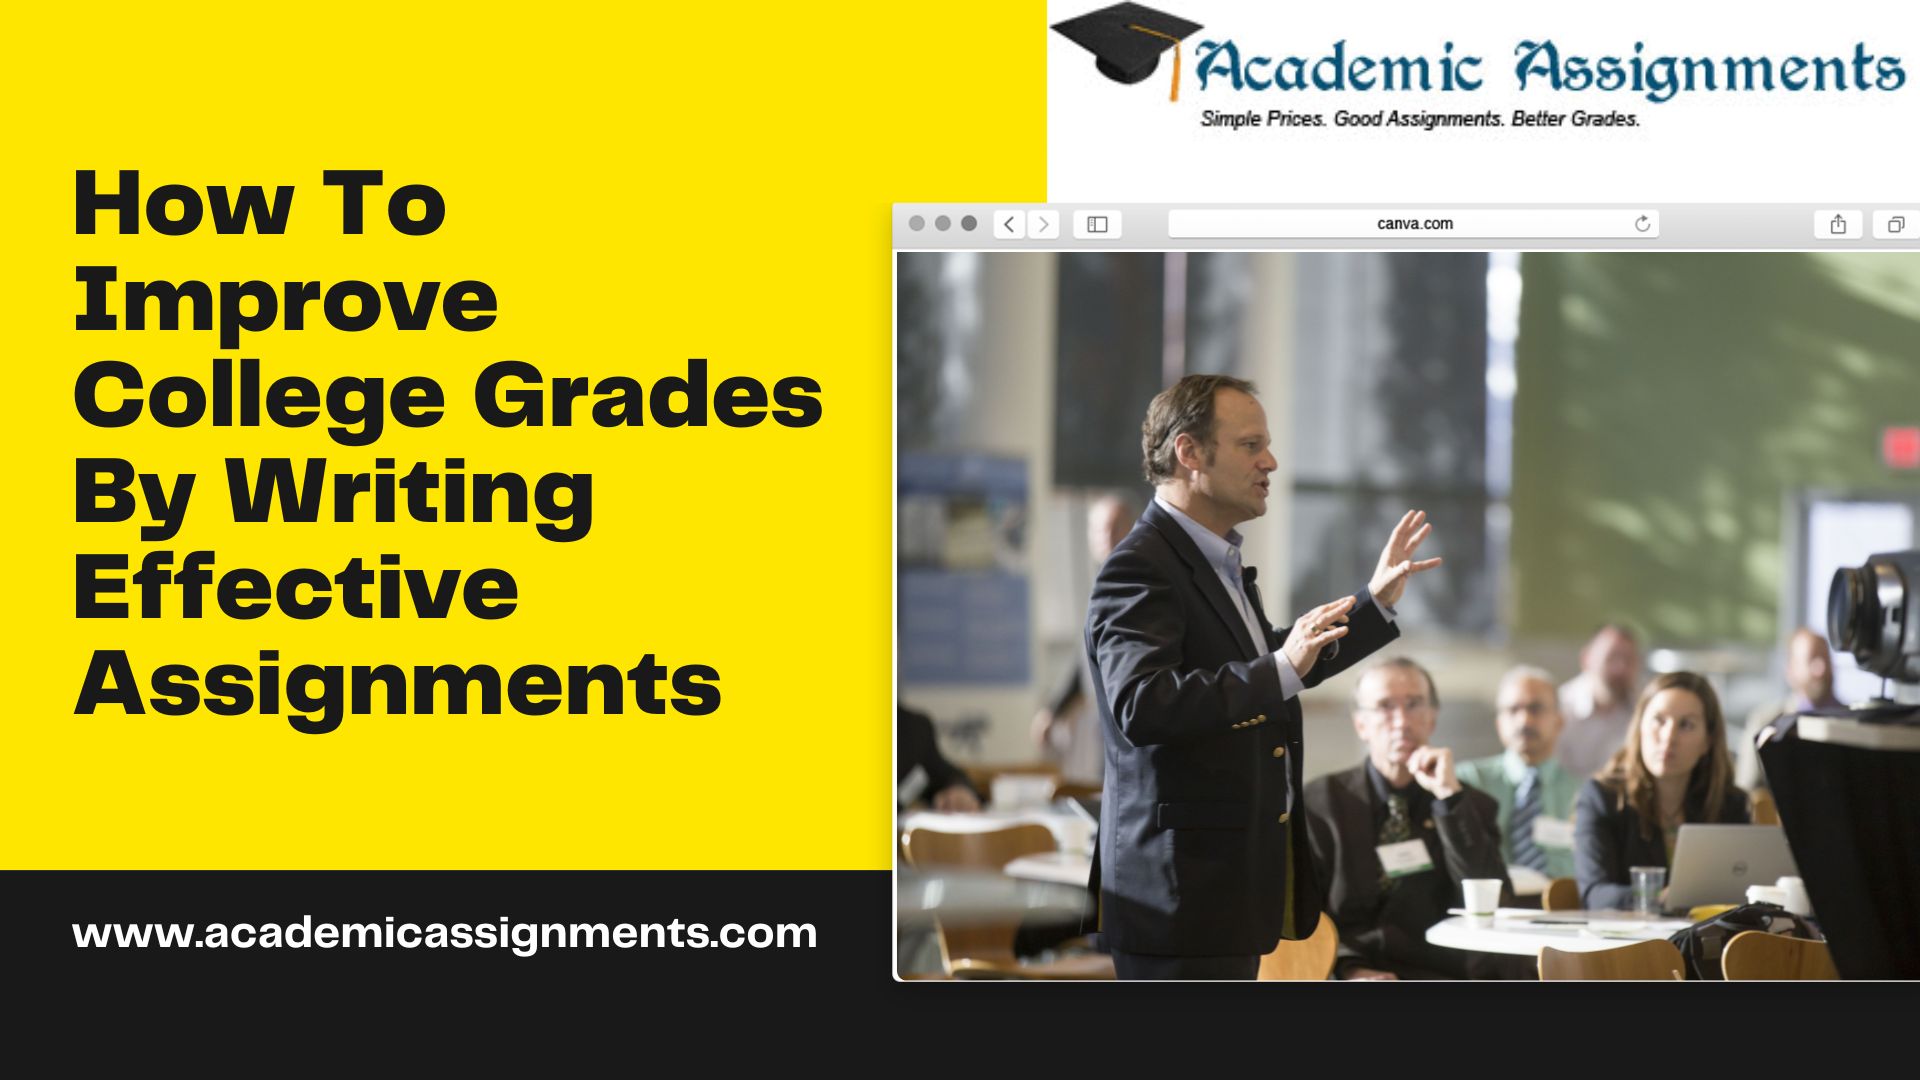 How To Improve College Grades By Writing Effective Assignments